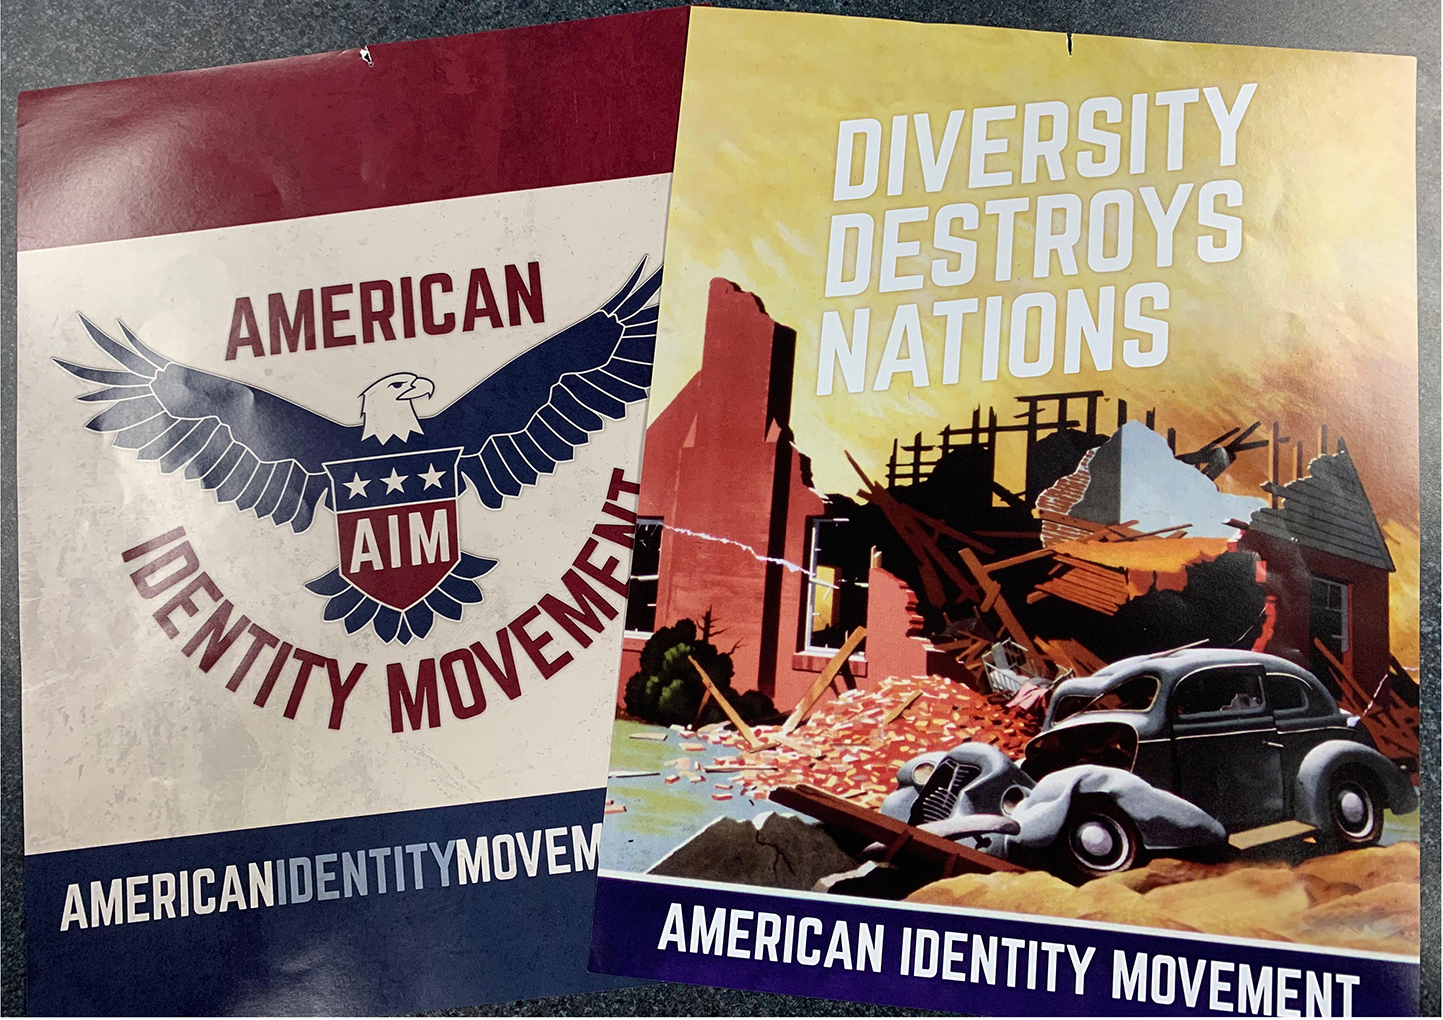 Posters from white nationalist organization appear on USD campus